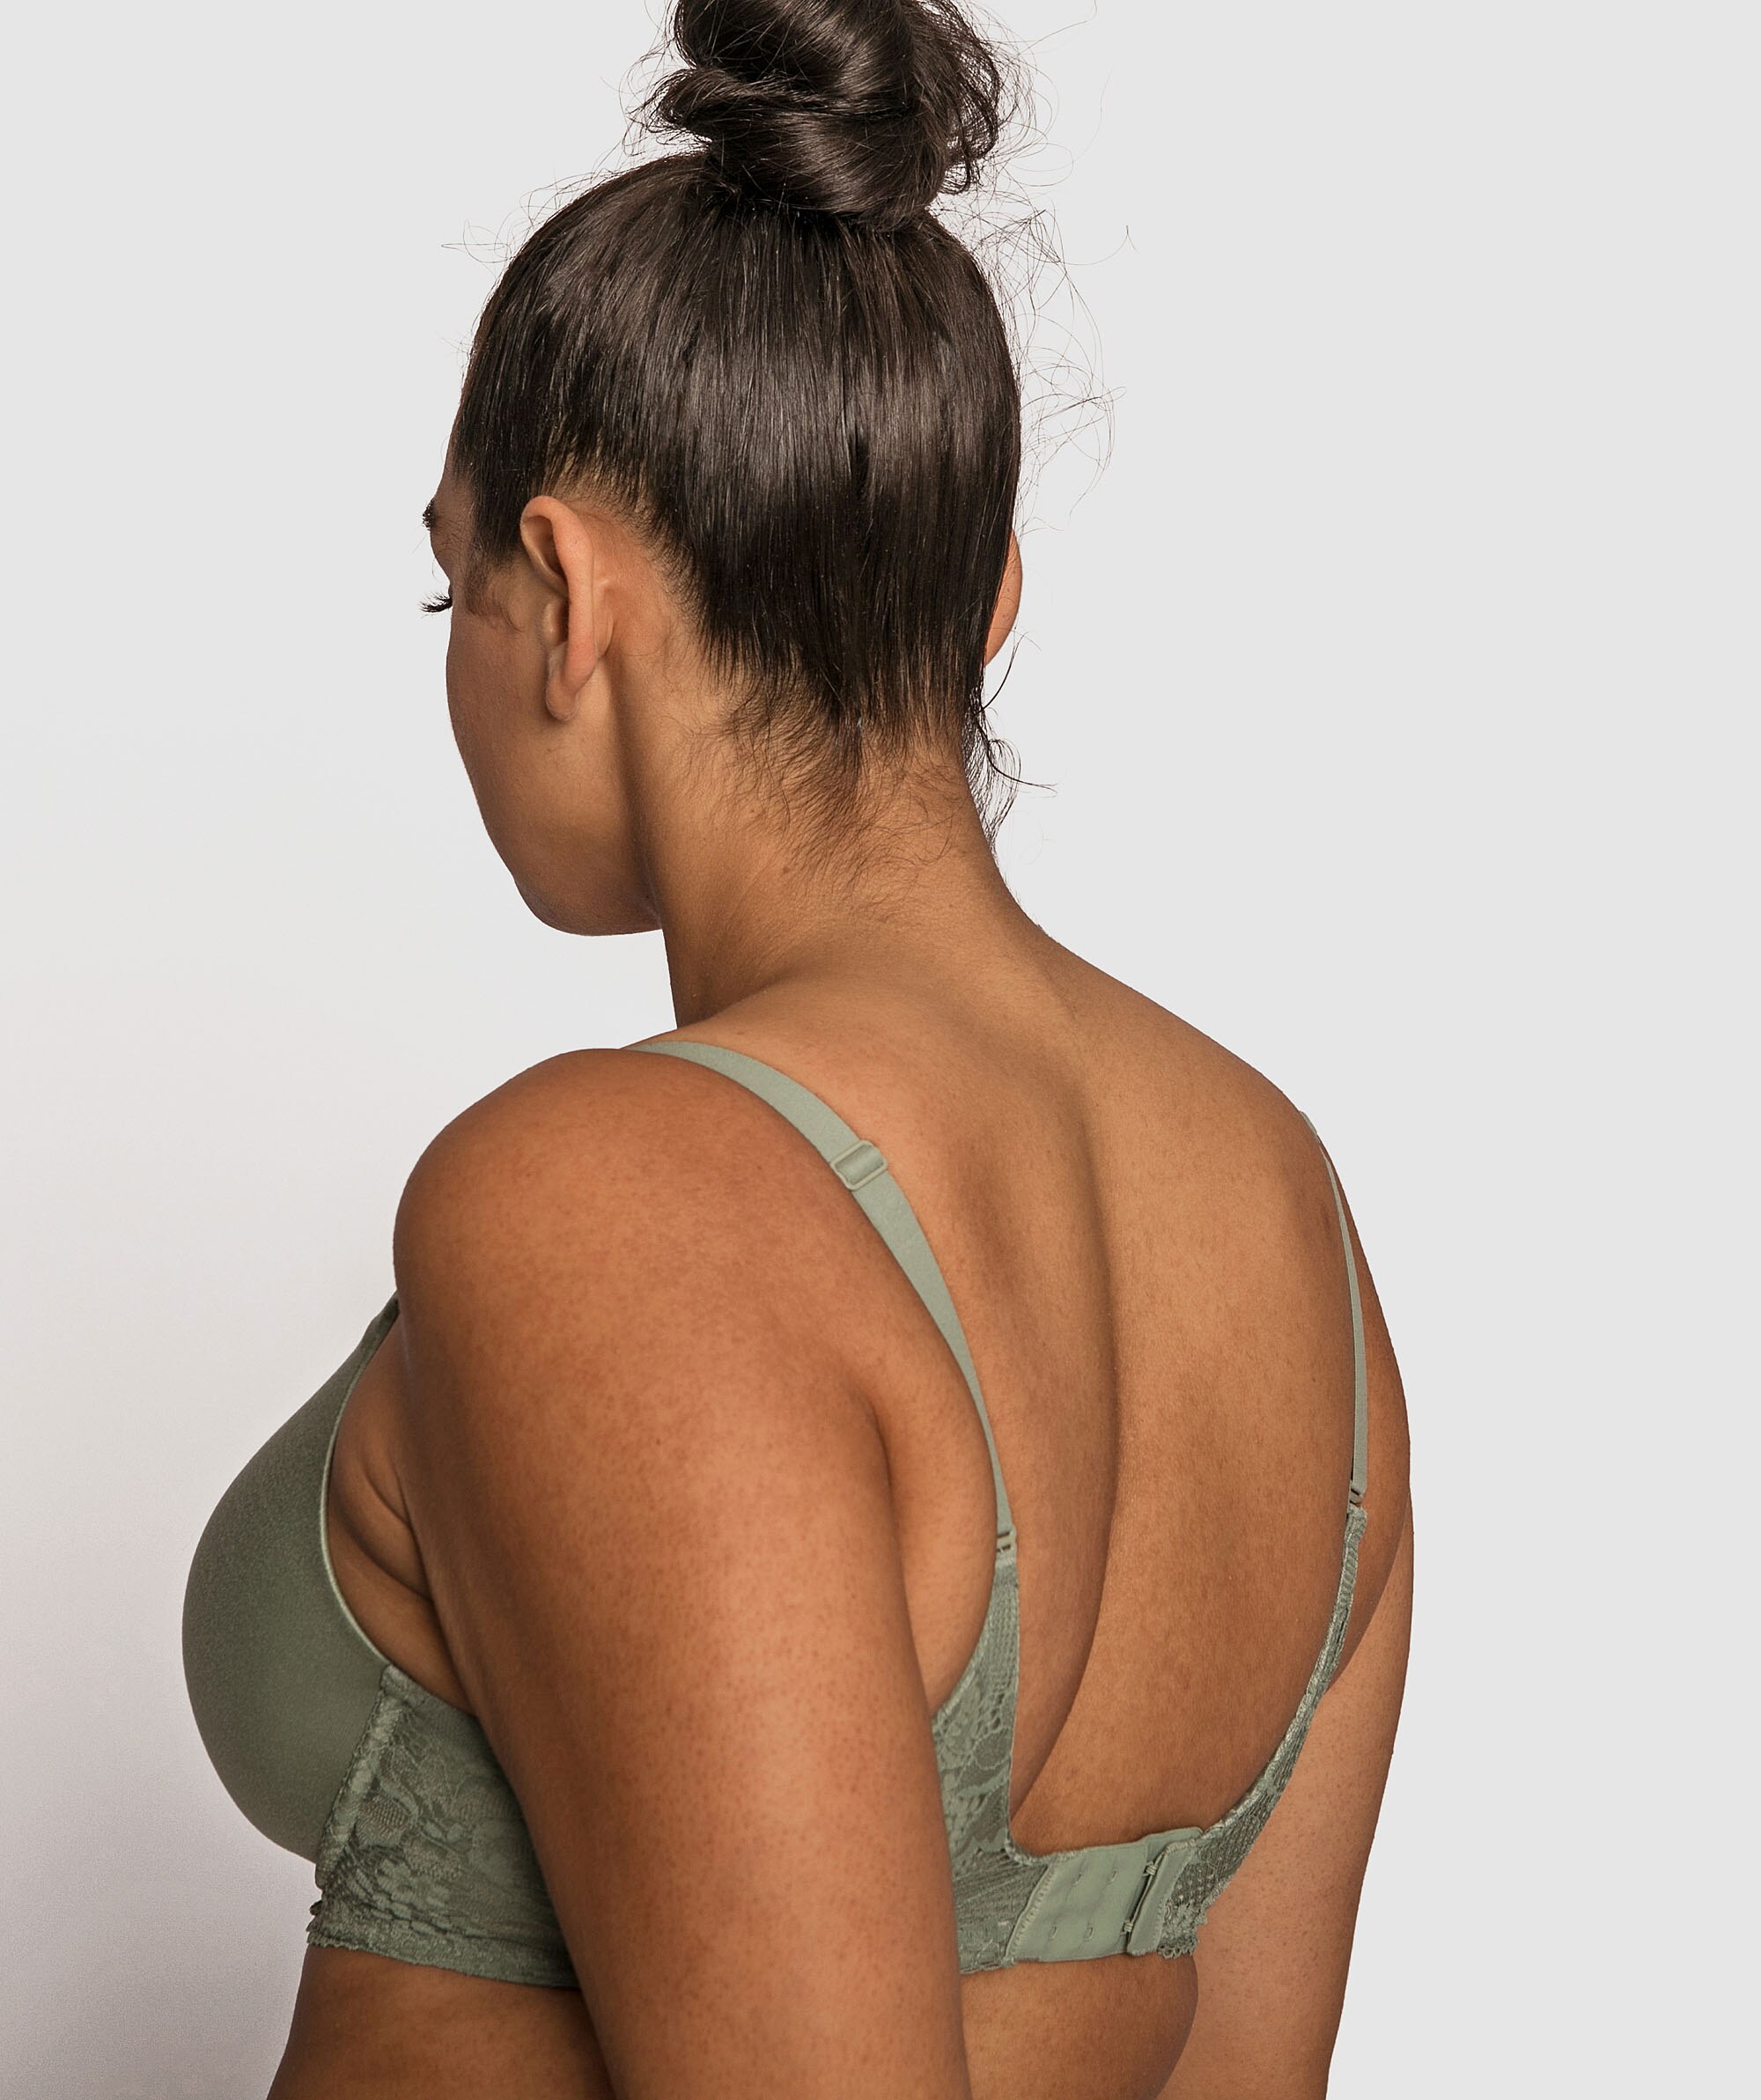 Body Bliss Lace Full Cup Bra - Green